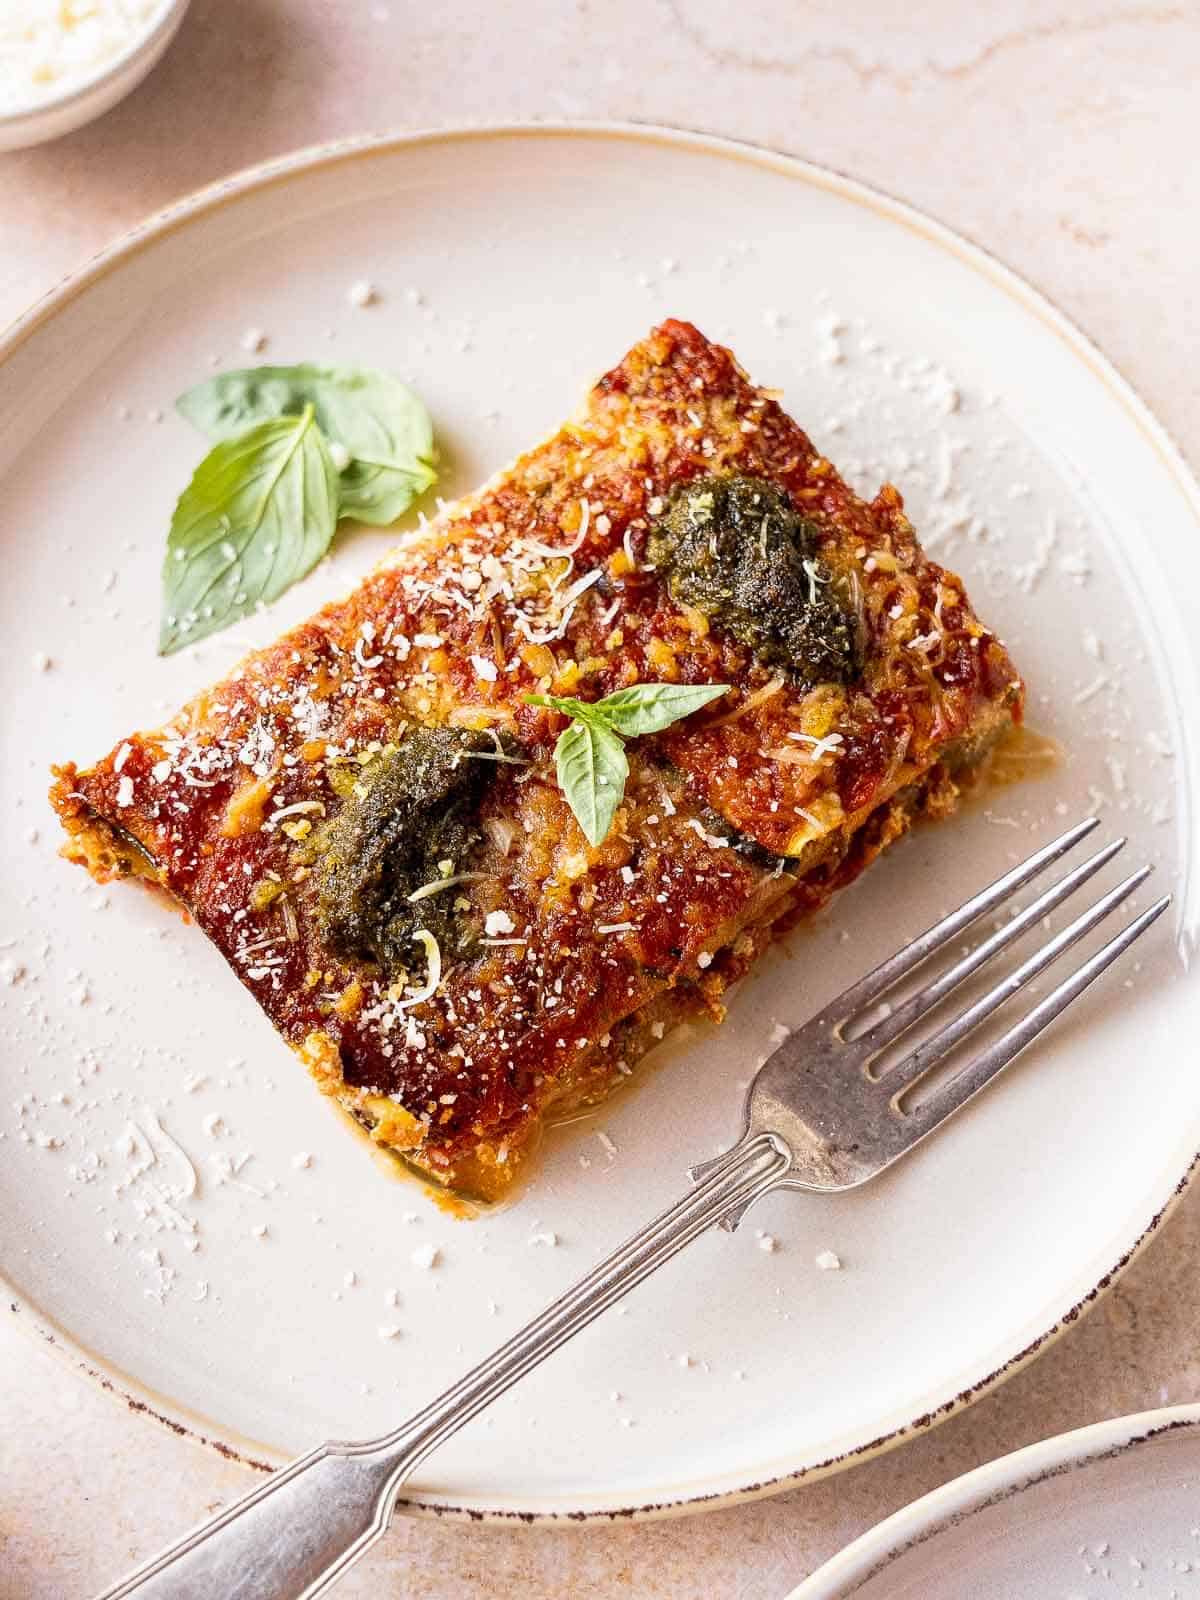 vegan zucchini casserole slice with sprinkled vegan parmesan cheese in a white plate.